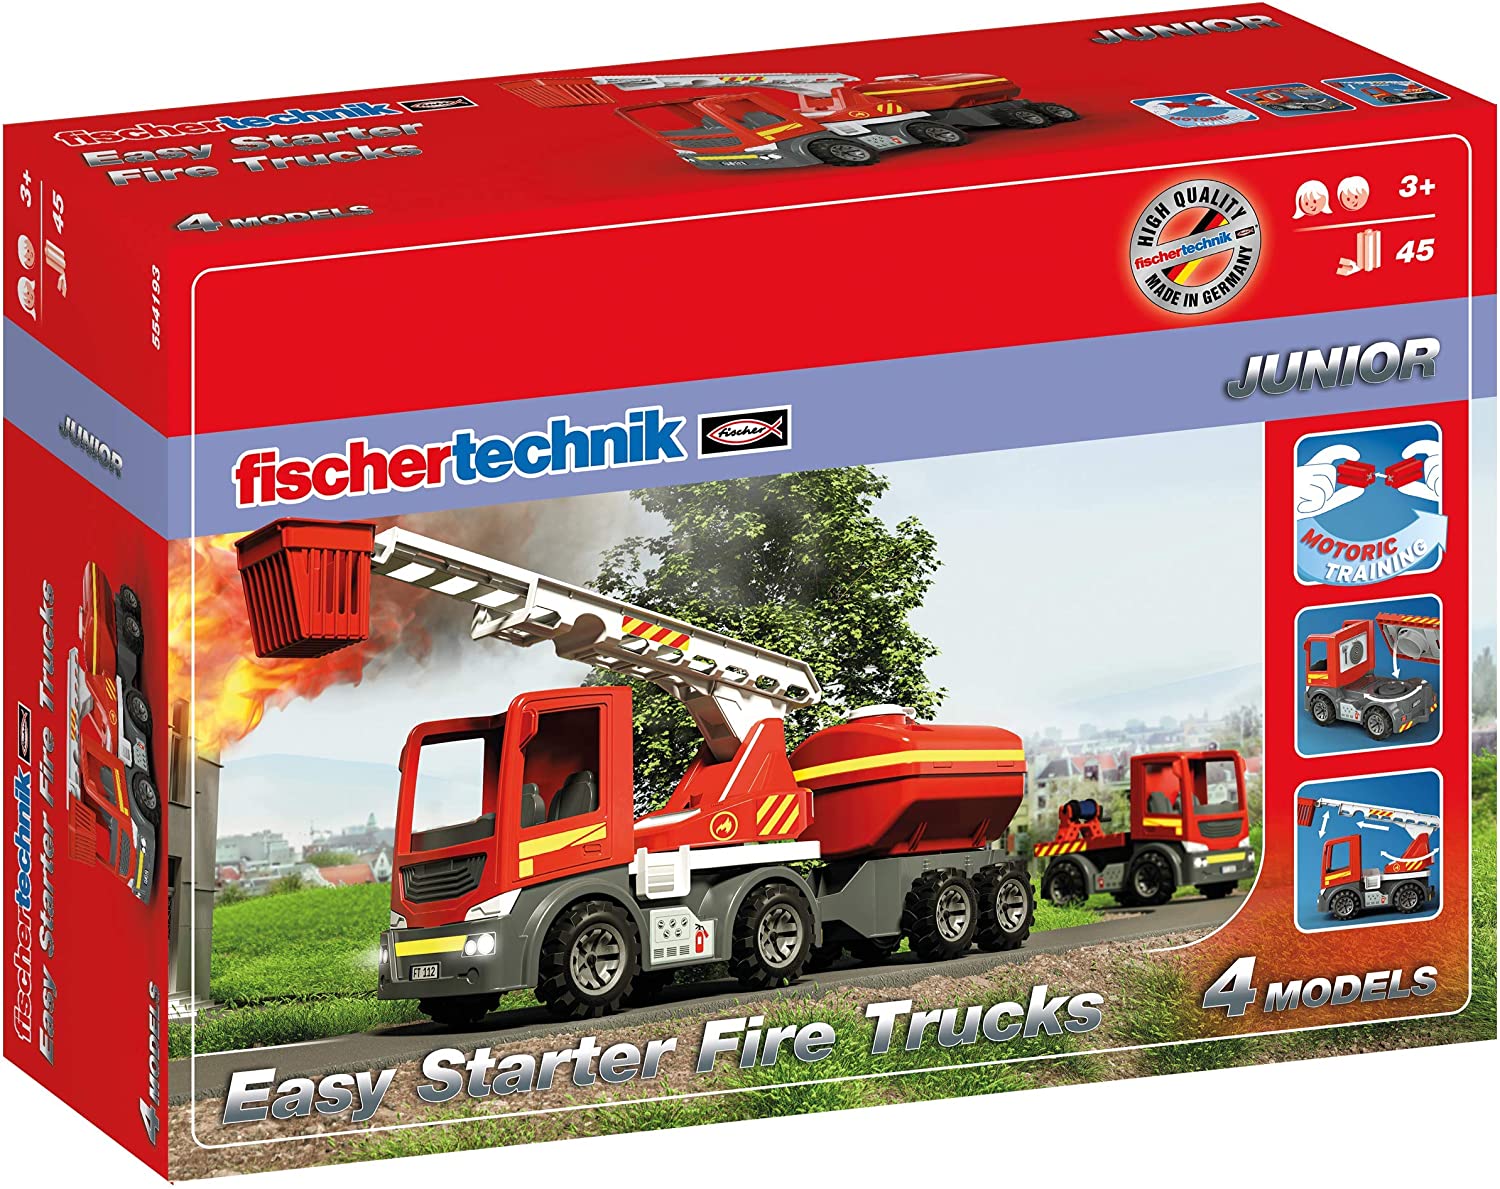 Fischertechnik 554193 Easy Starter Fire Trucks Toy For Ages 3 And Above The